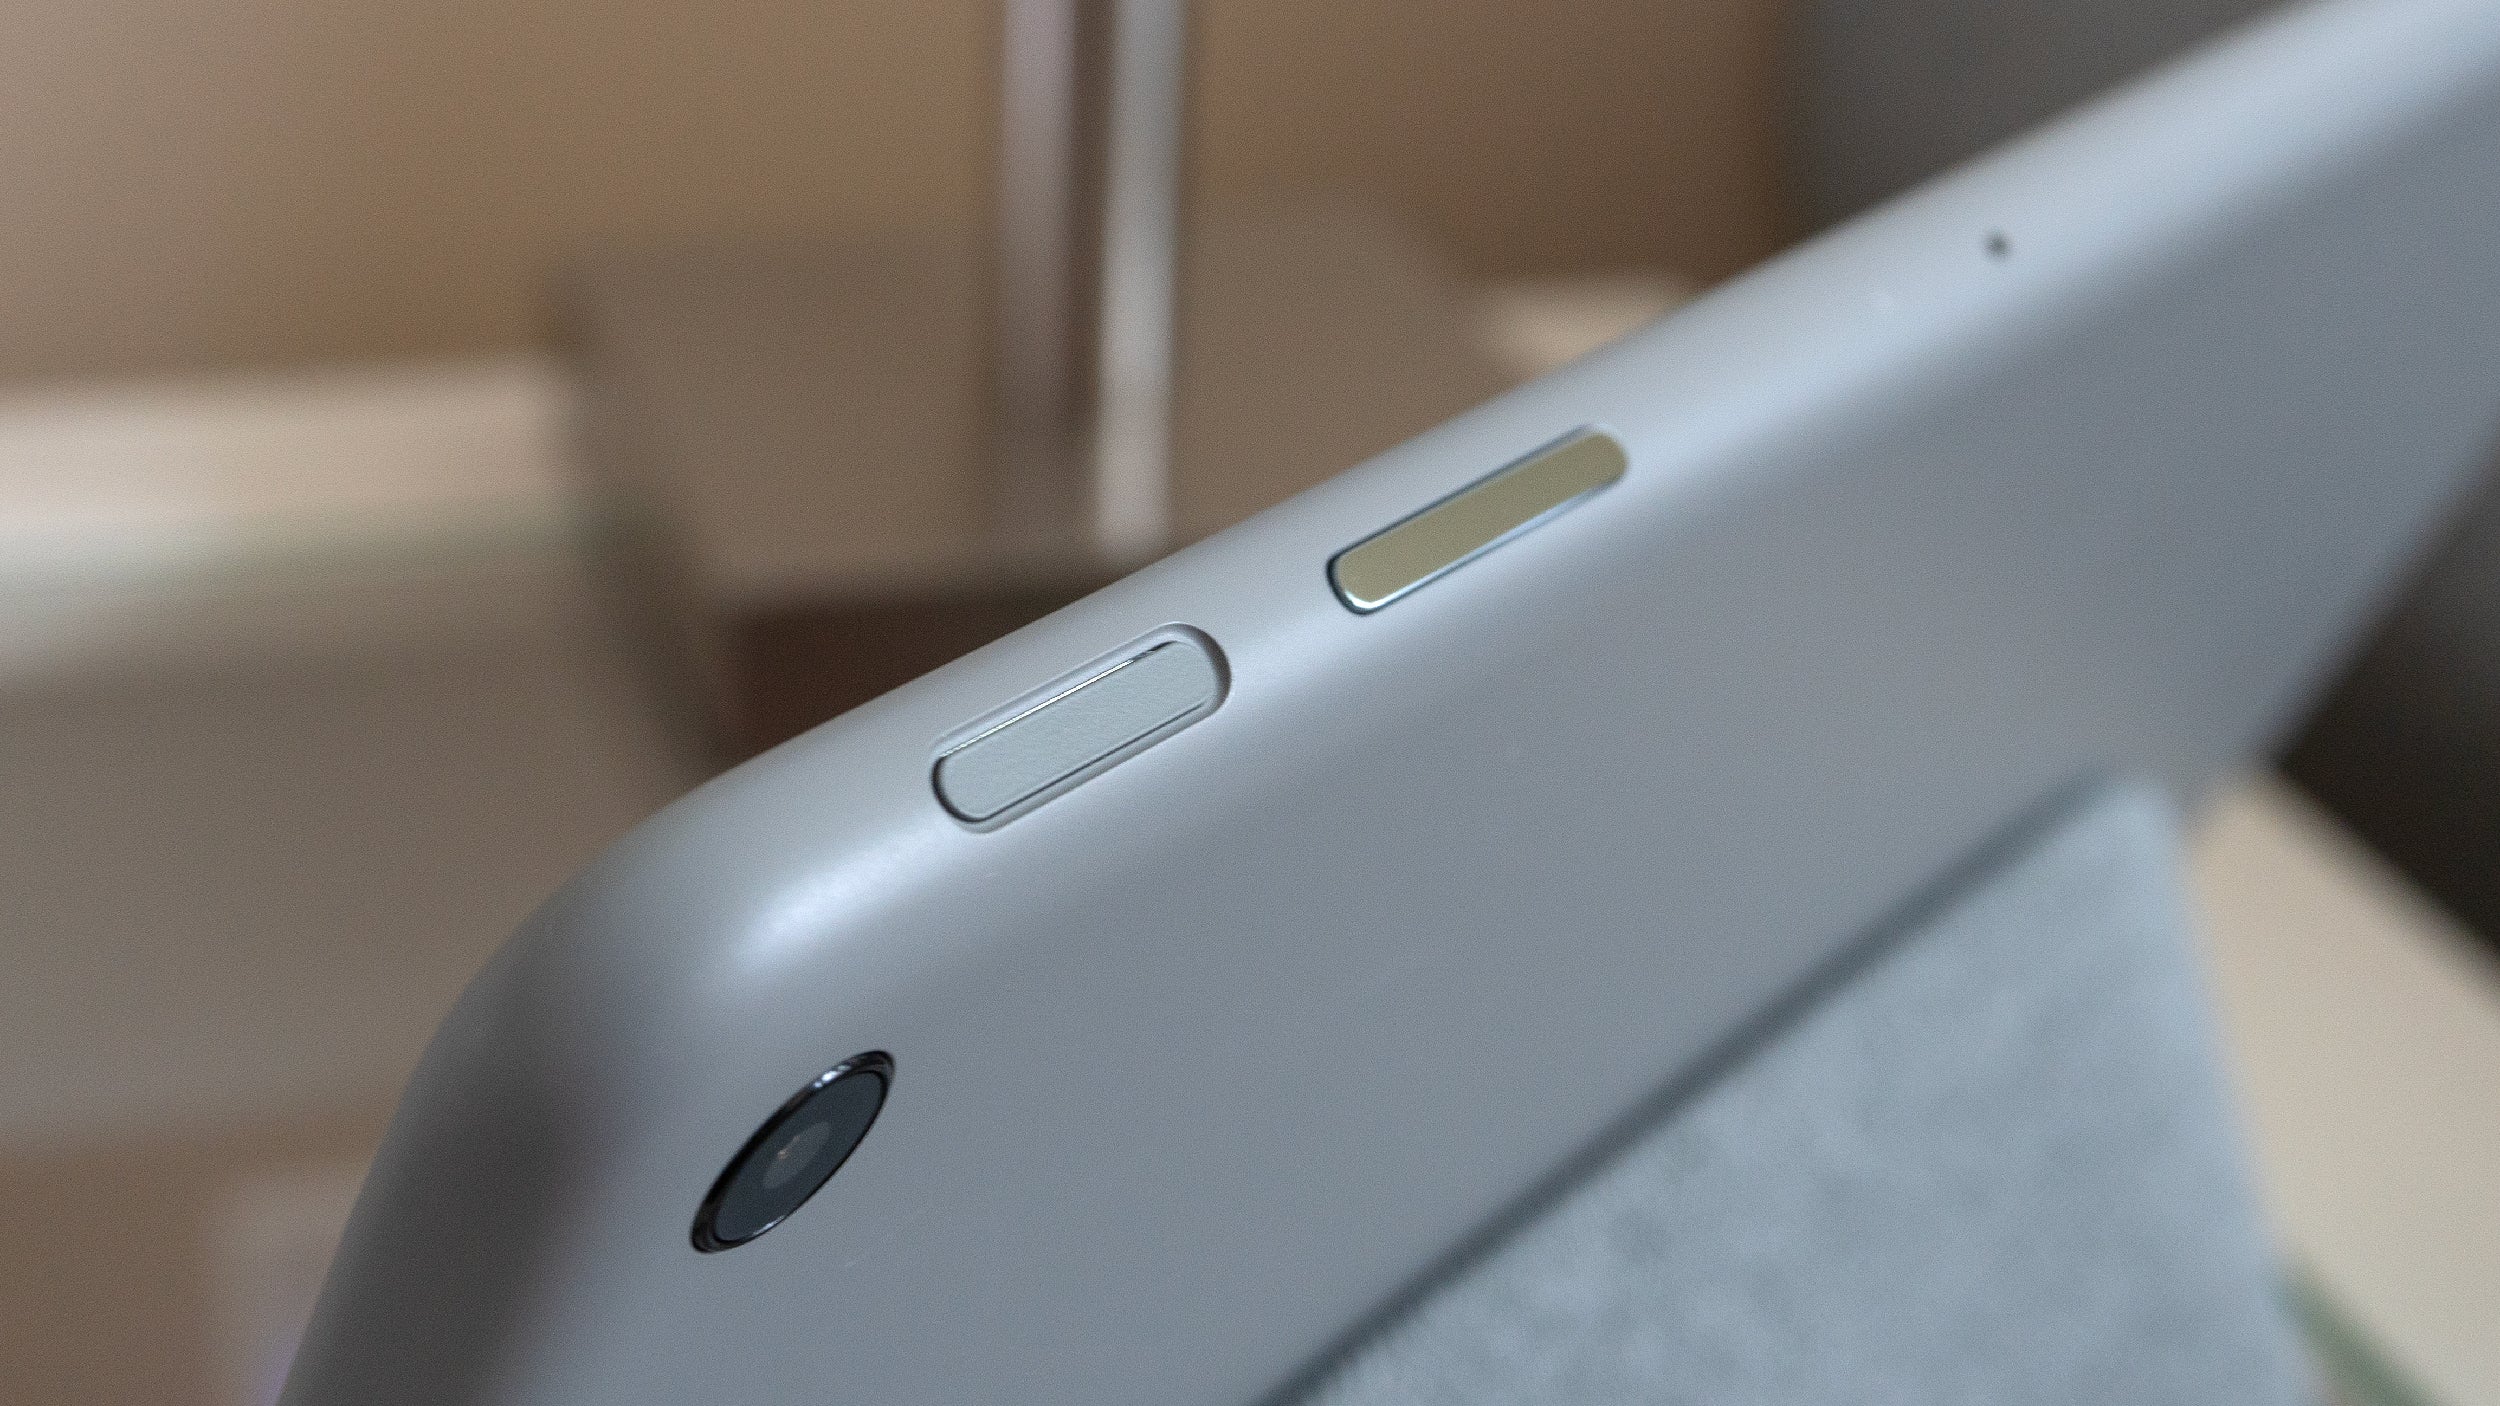 The lock/power button is located on the top edge of the Pixel Tablet (when using it in landscape mode) next to the volume rocker, and features an integrated fingerprint reader. (Photo: Andrew Liszewski | Gizmodo)